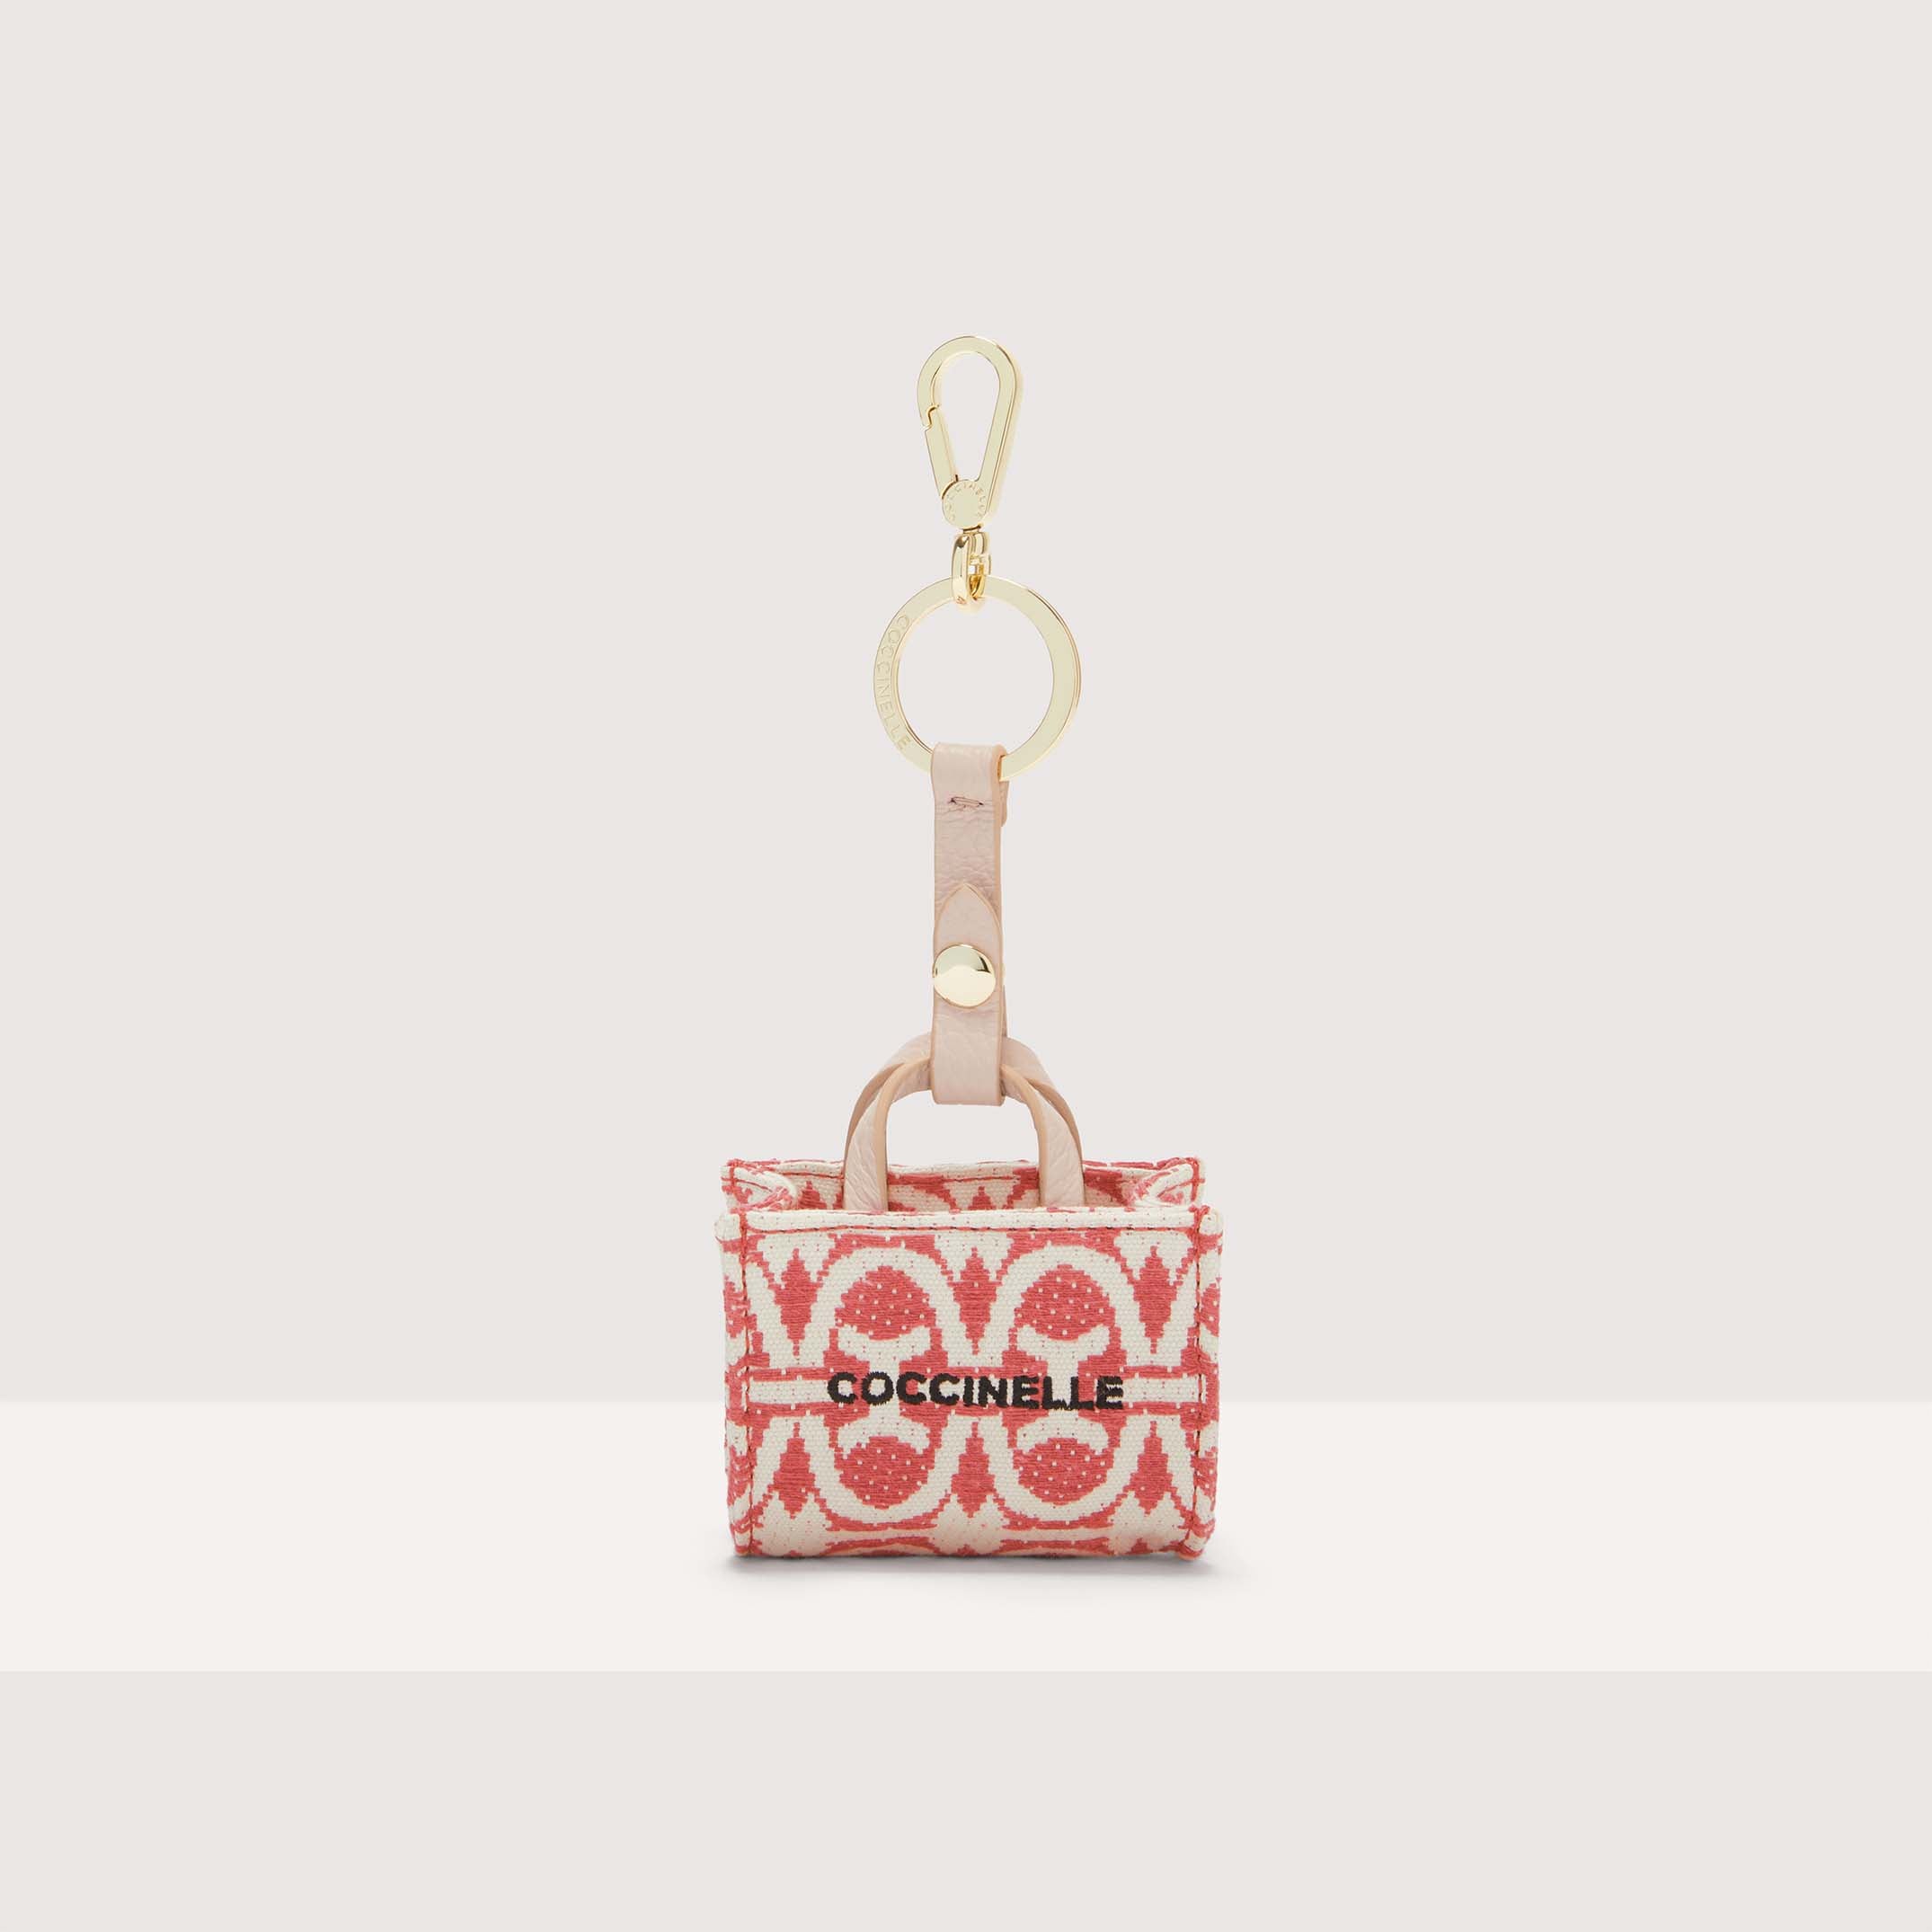 Coccinelle Micro Never Without Bag Monogram Key Ring